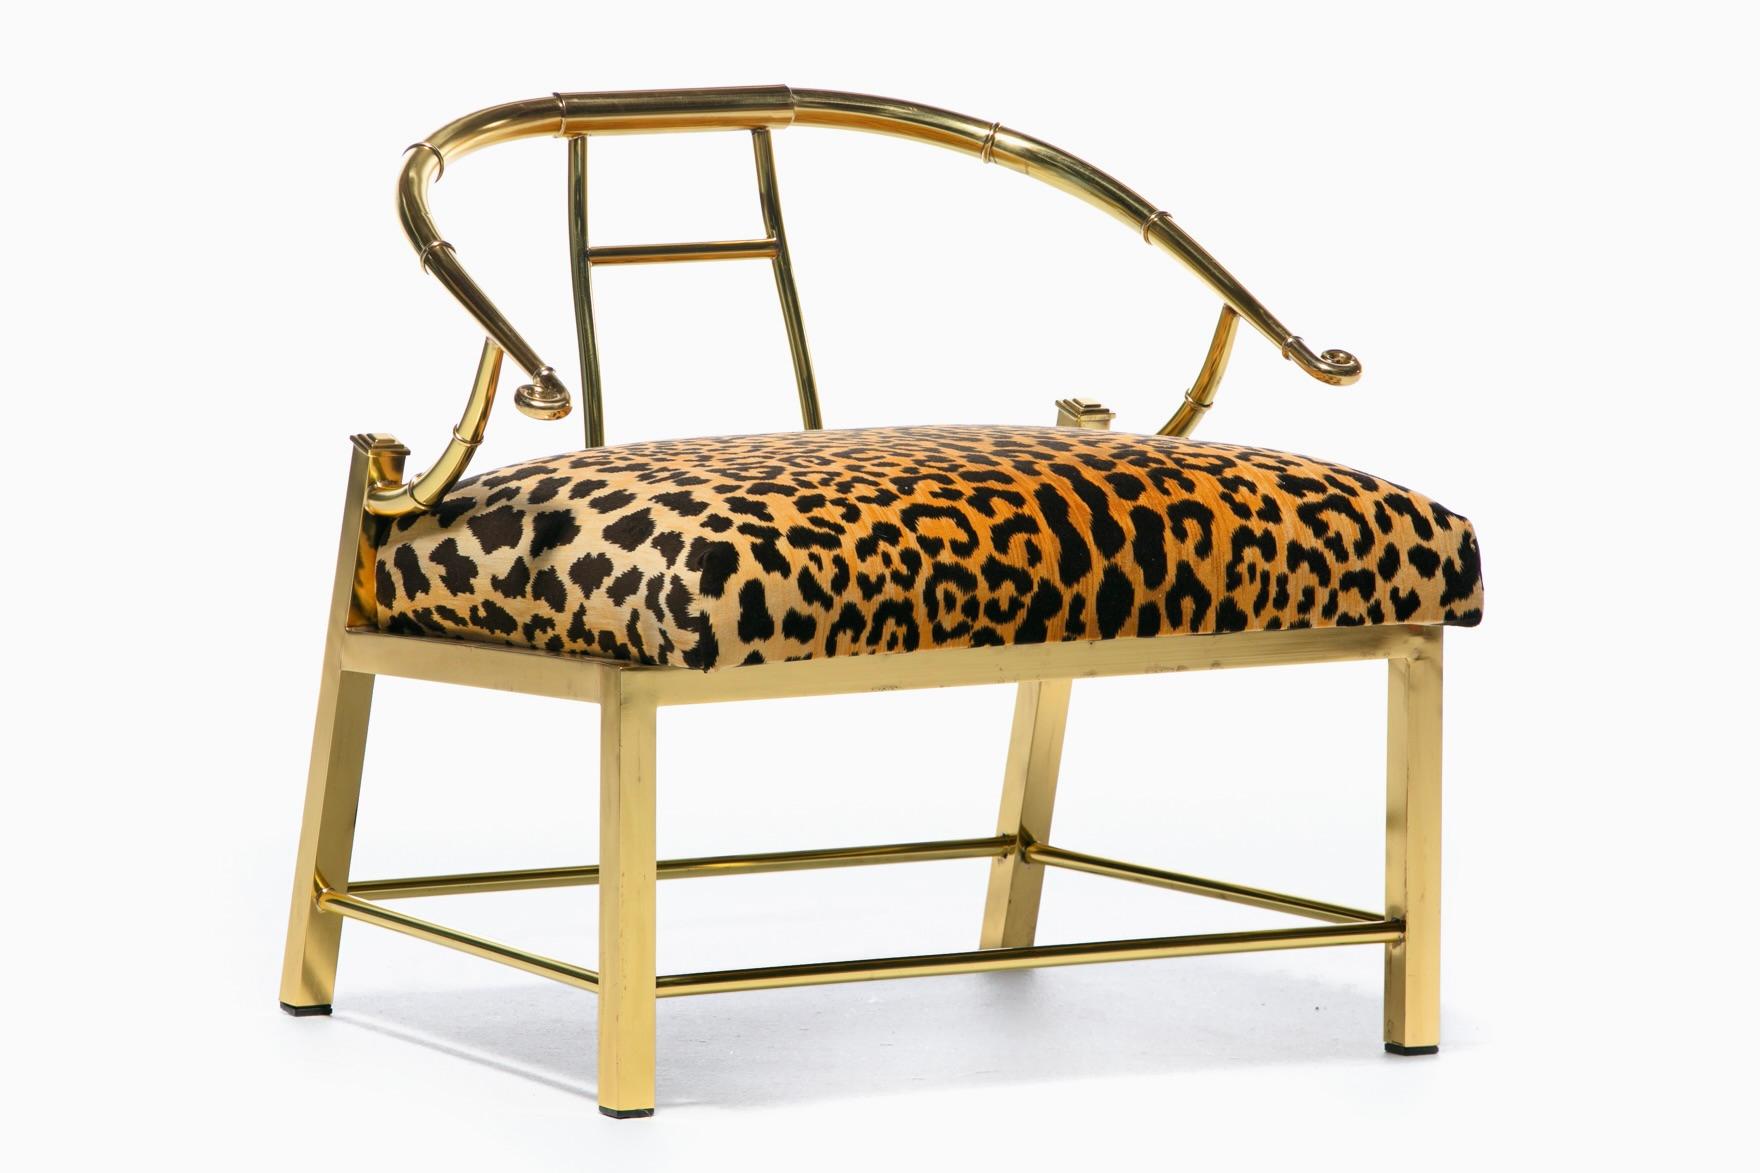 Mid-20th Century Pair of Brass Hollywood Regency Chairs in Leopard Velvet by Mastercraft C. 1960s